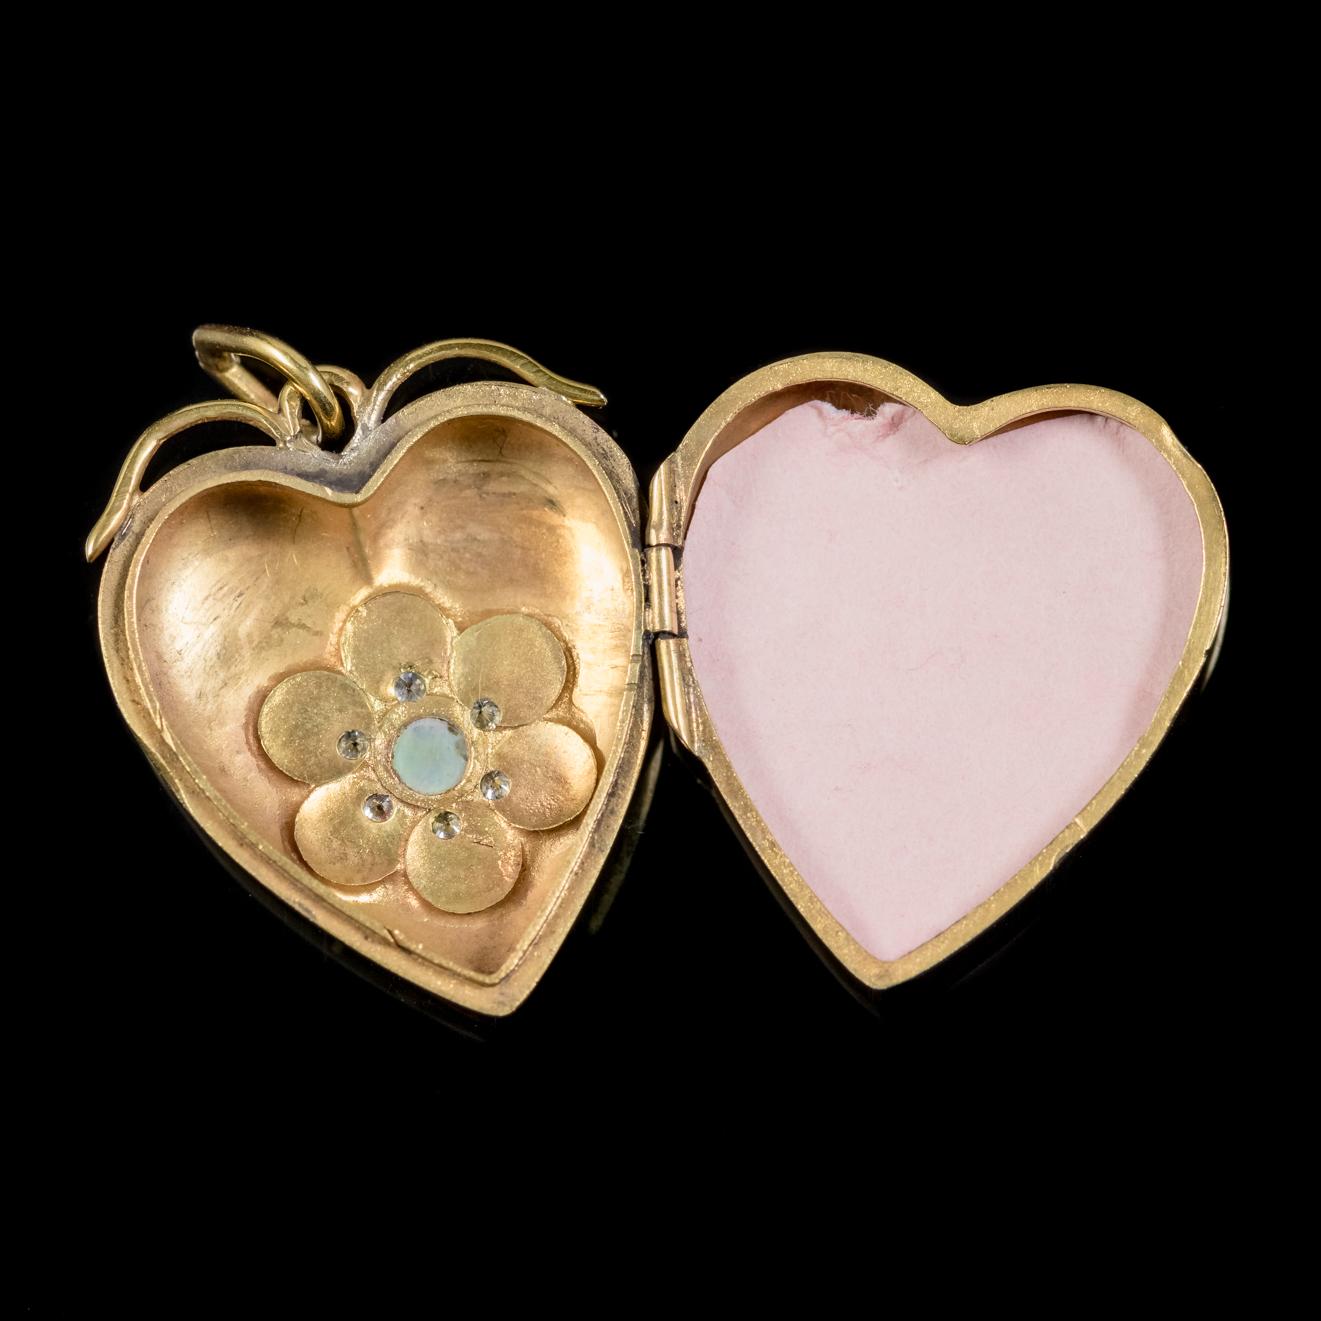 Antique Victorian Diamond Opal Heart Locket 18 Carat Gold, circa 1900 In Excellent Condition For Sale In Lancaster, Lancashire